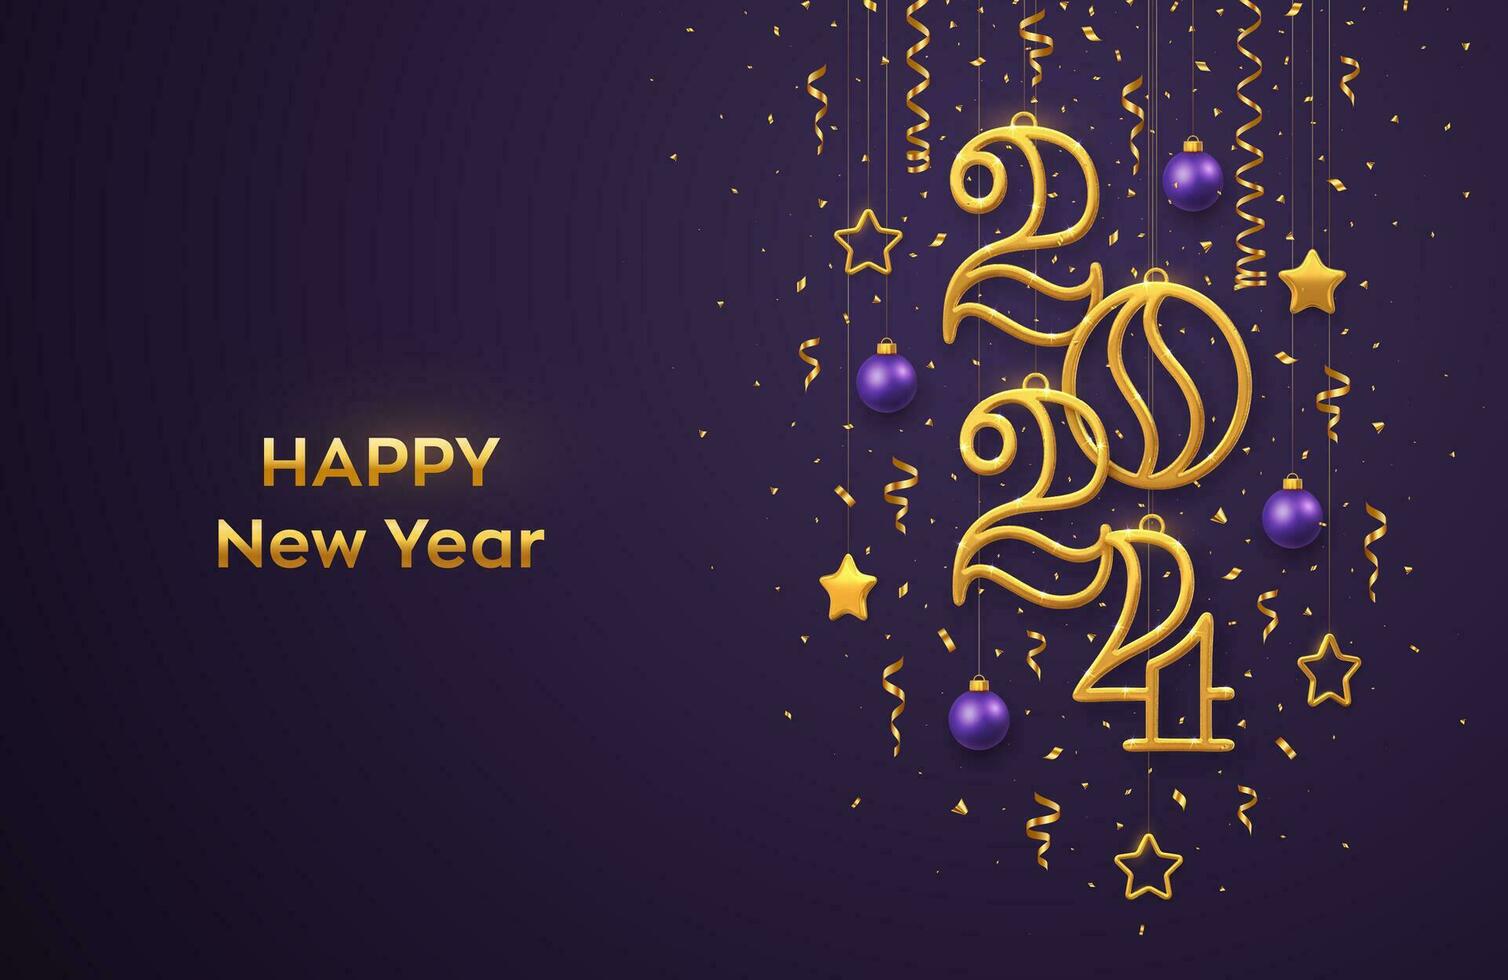 Happy New Year 2023 Free Stock Picture 1024x683.jpg